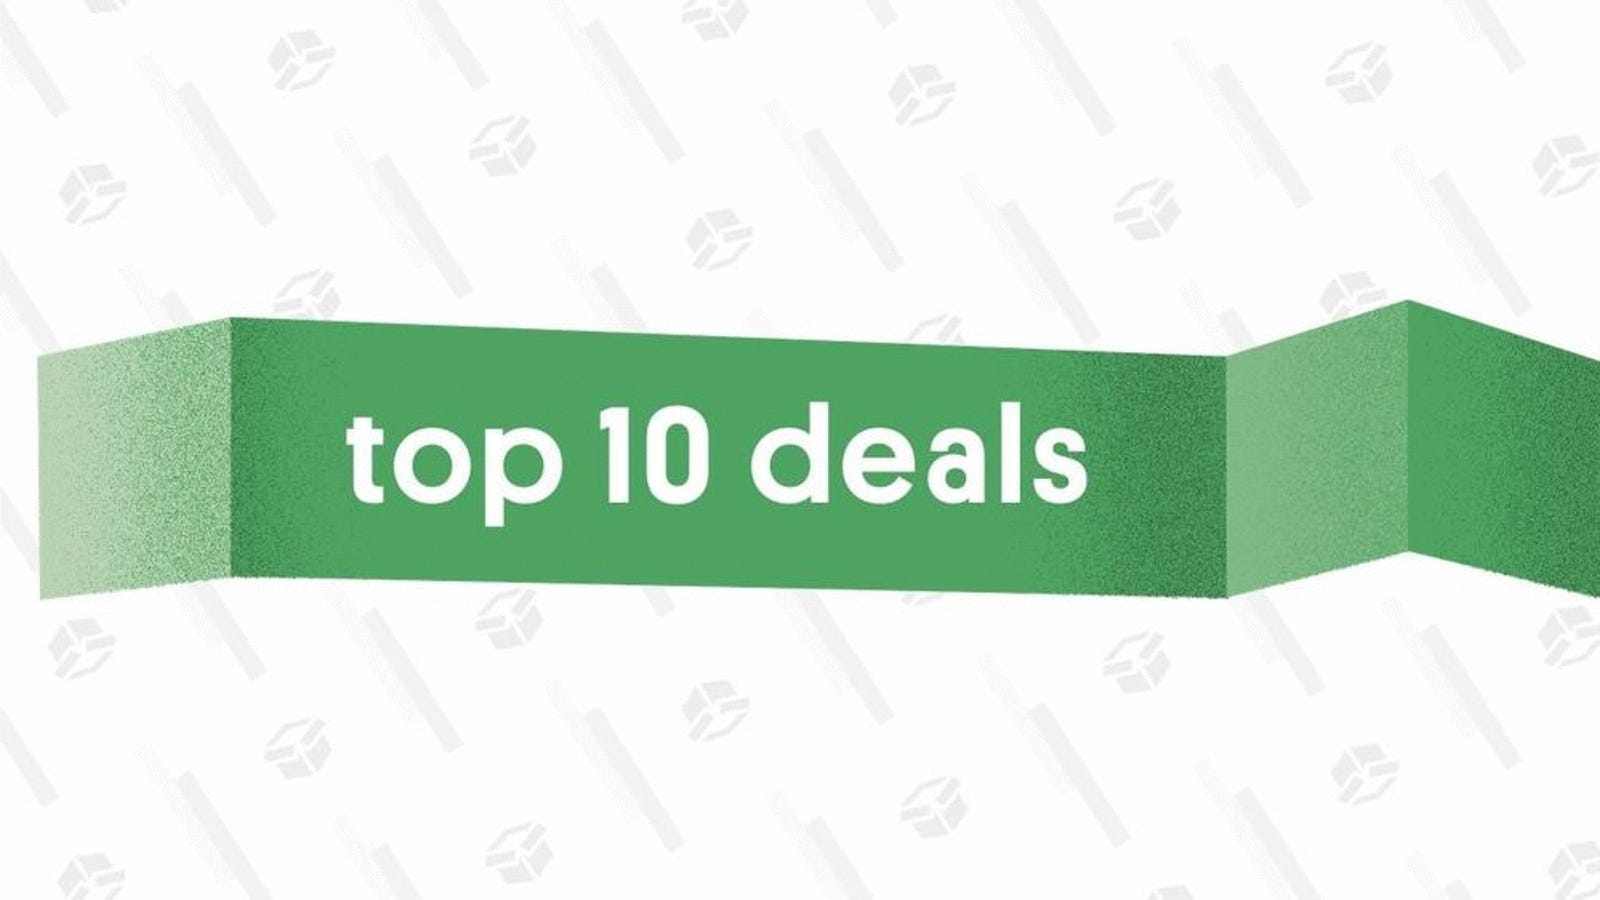 photo of The 10 Best Deals of June 24, 2019 image